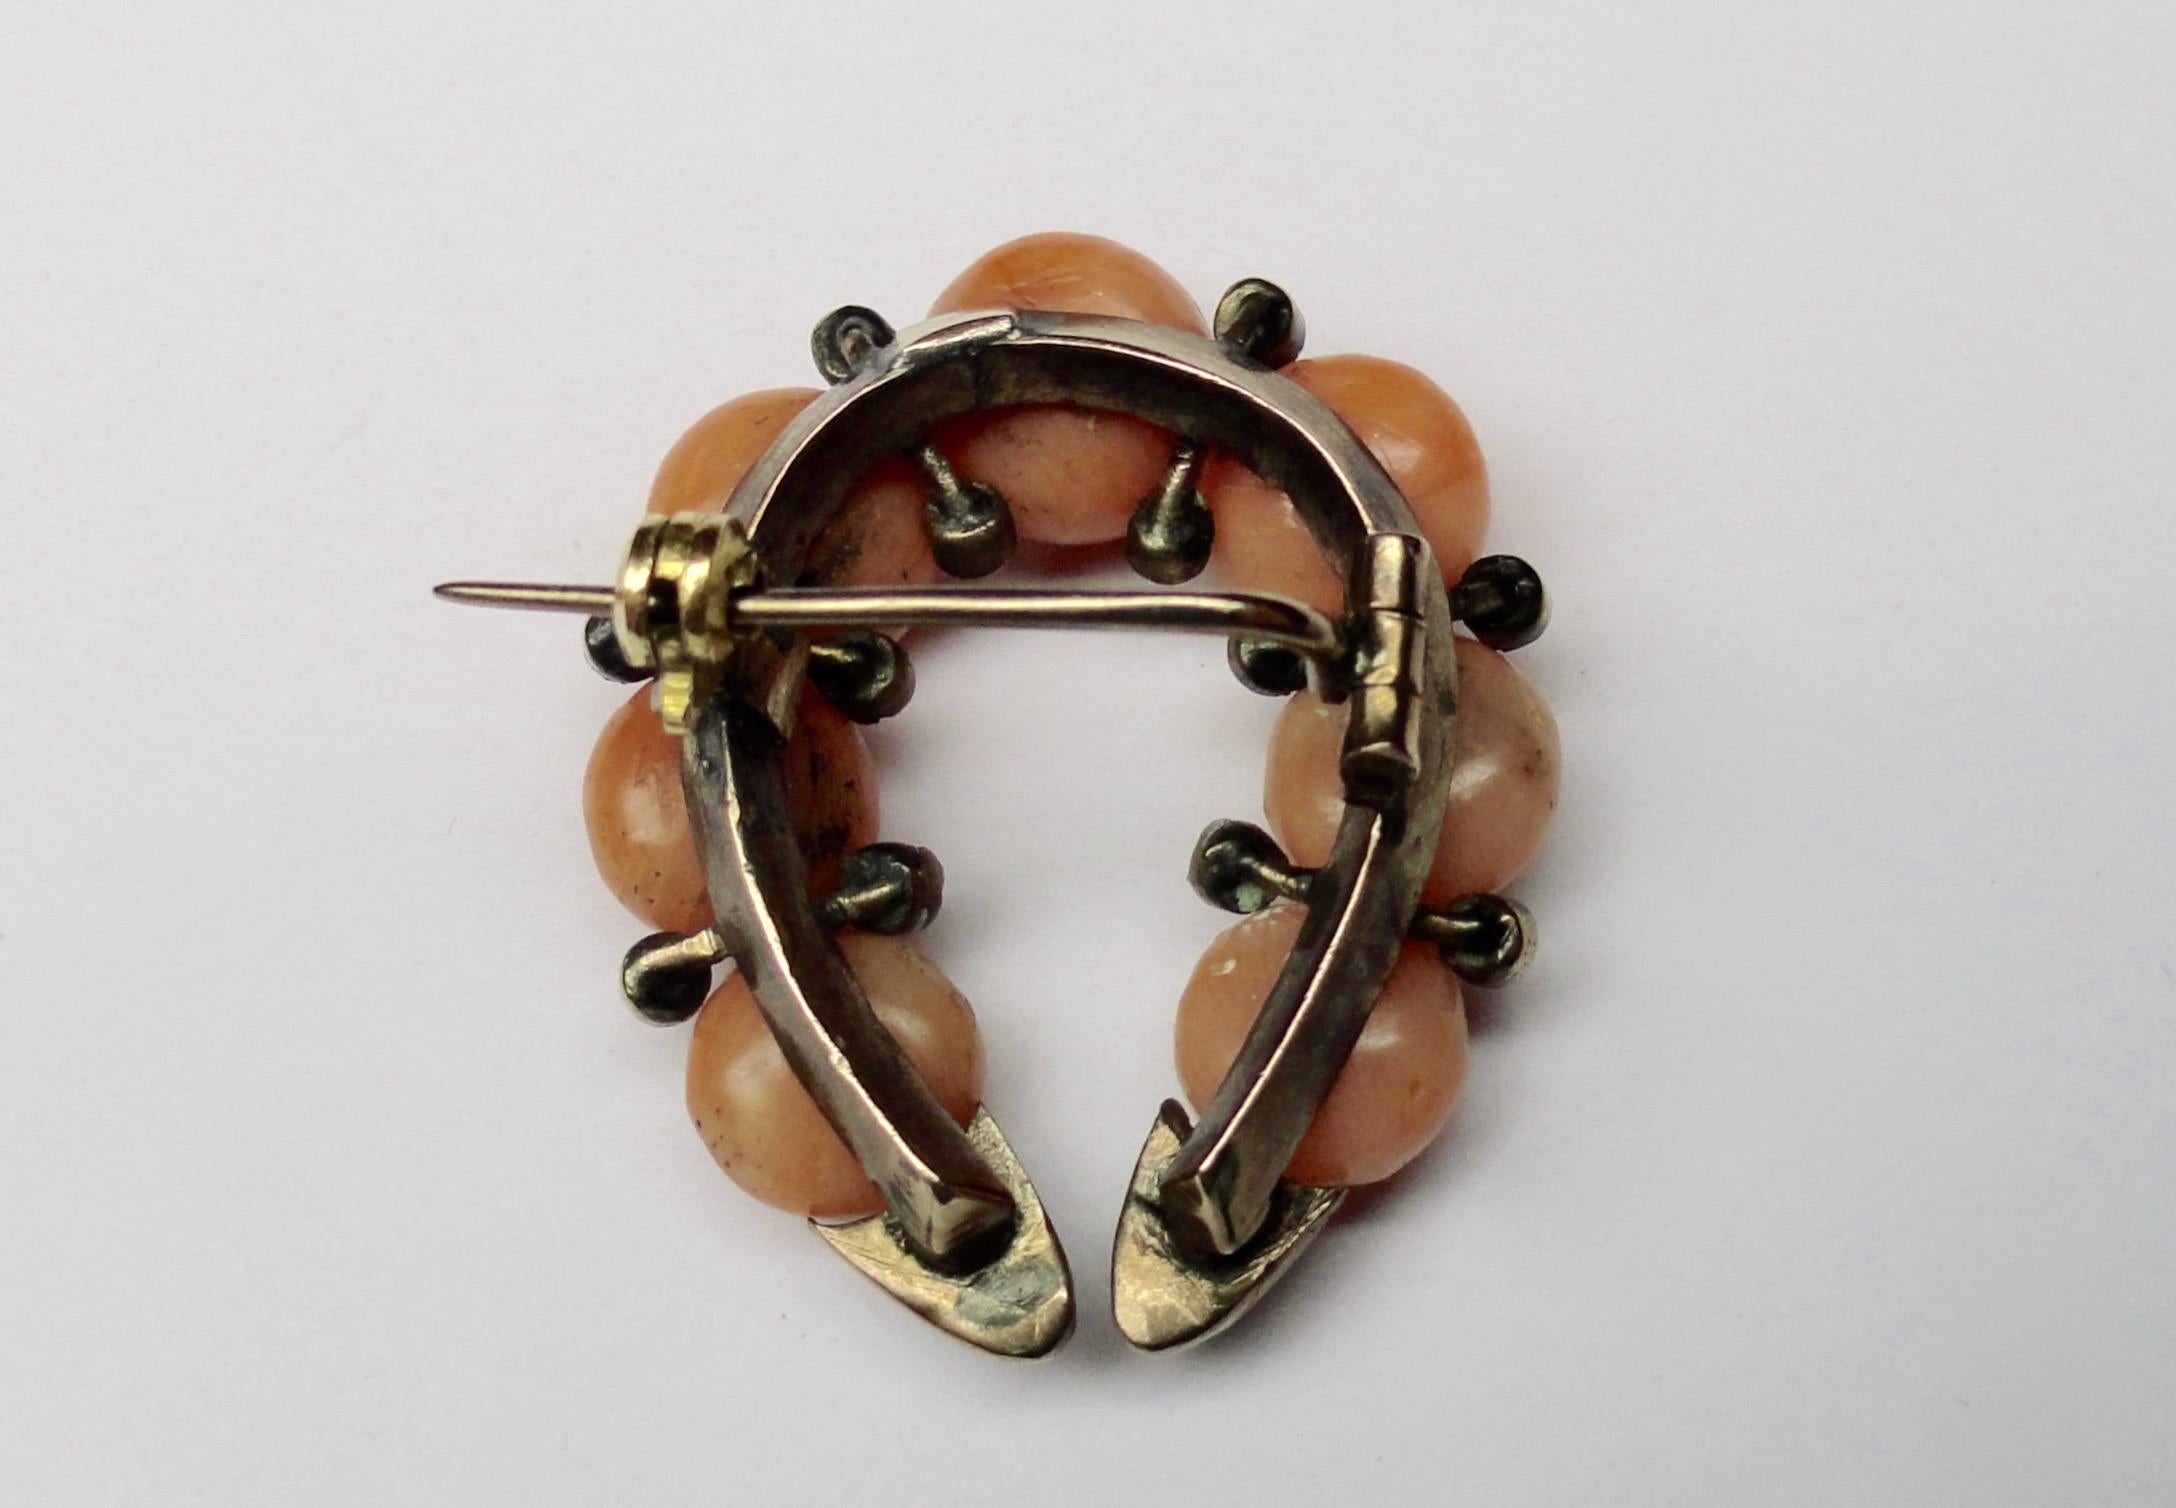 Beautiful Pinchbeck antique victorian brooch with natural coral and micro pearls.